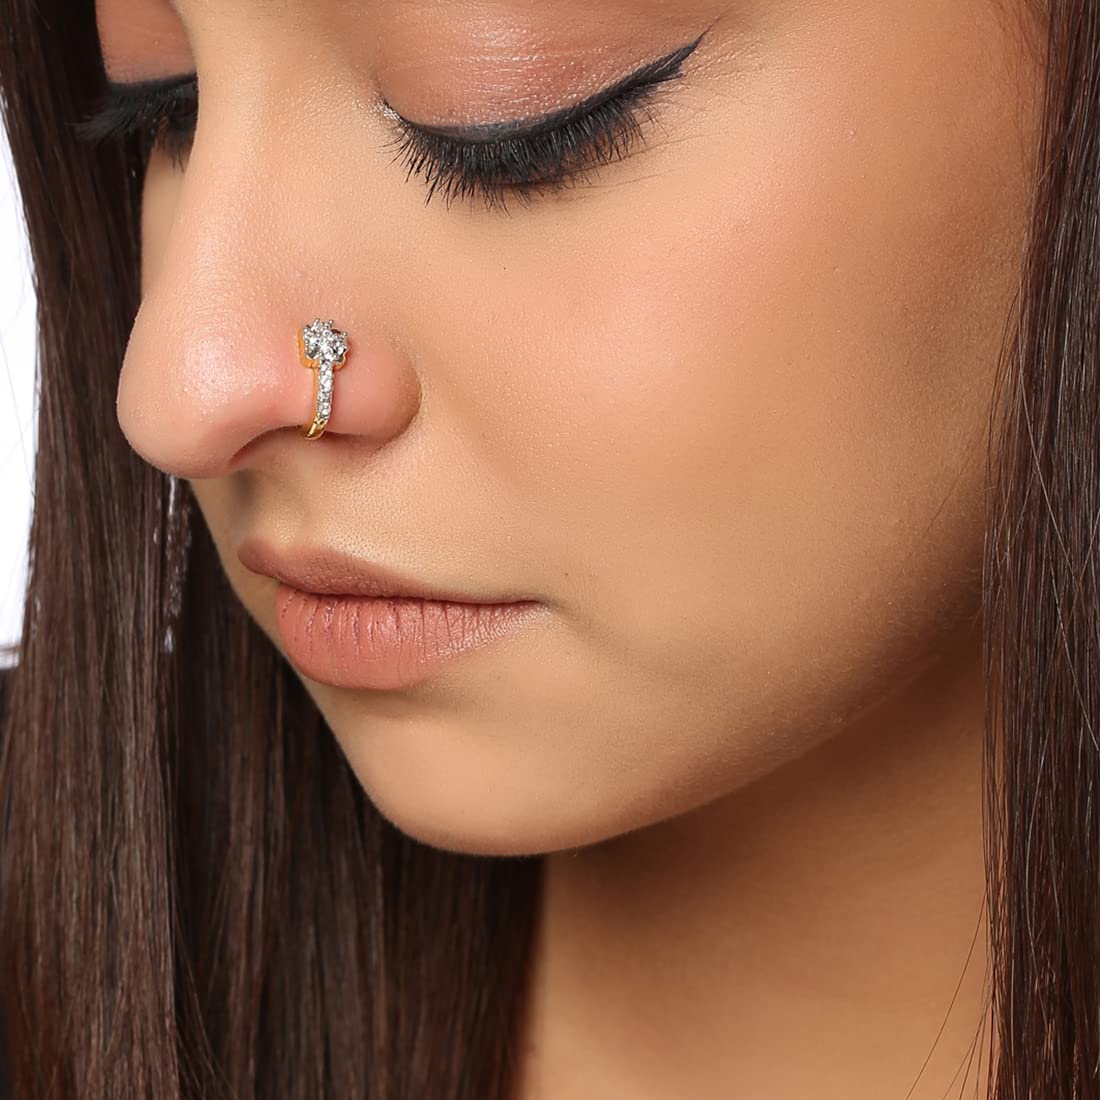 Floral Silver Nath/Nose Ring By Moha- Pierced Left